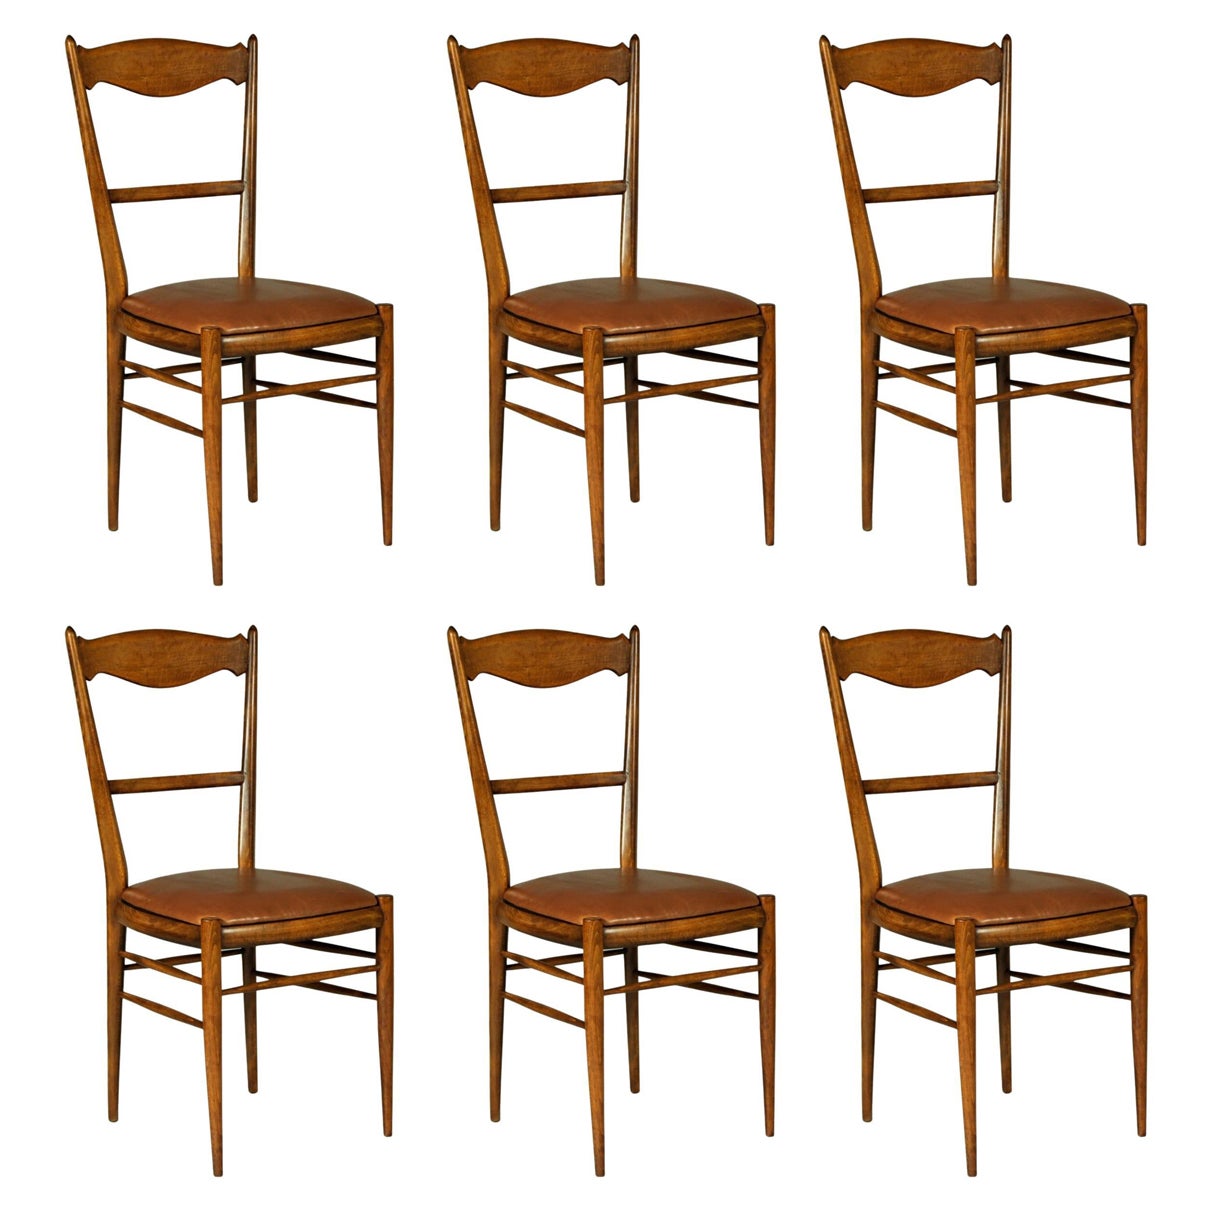 1970s Set of 6 Beech Dining Chairs, Leather Upholstery For Sale